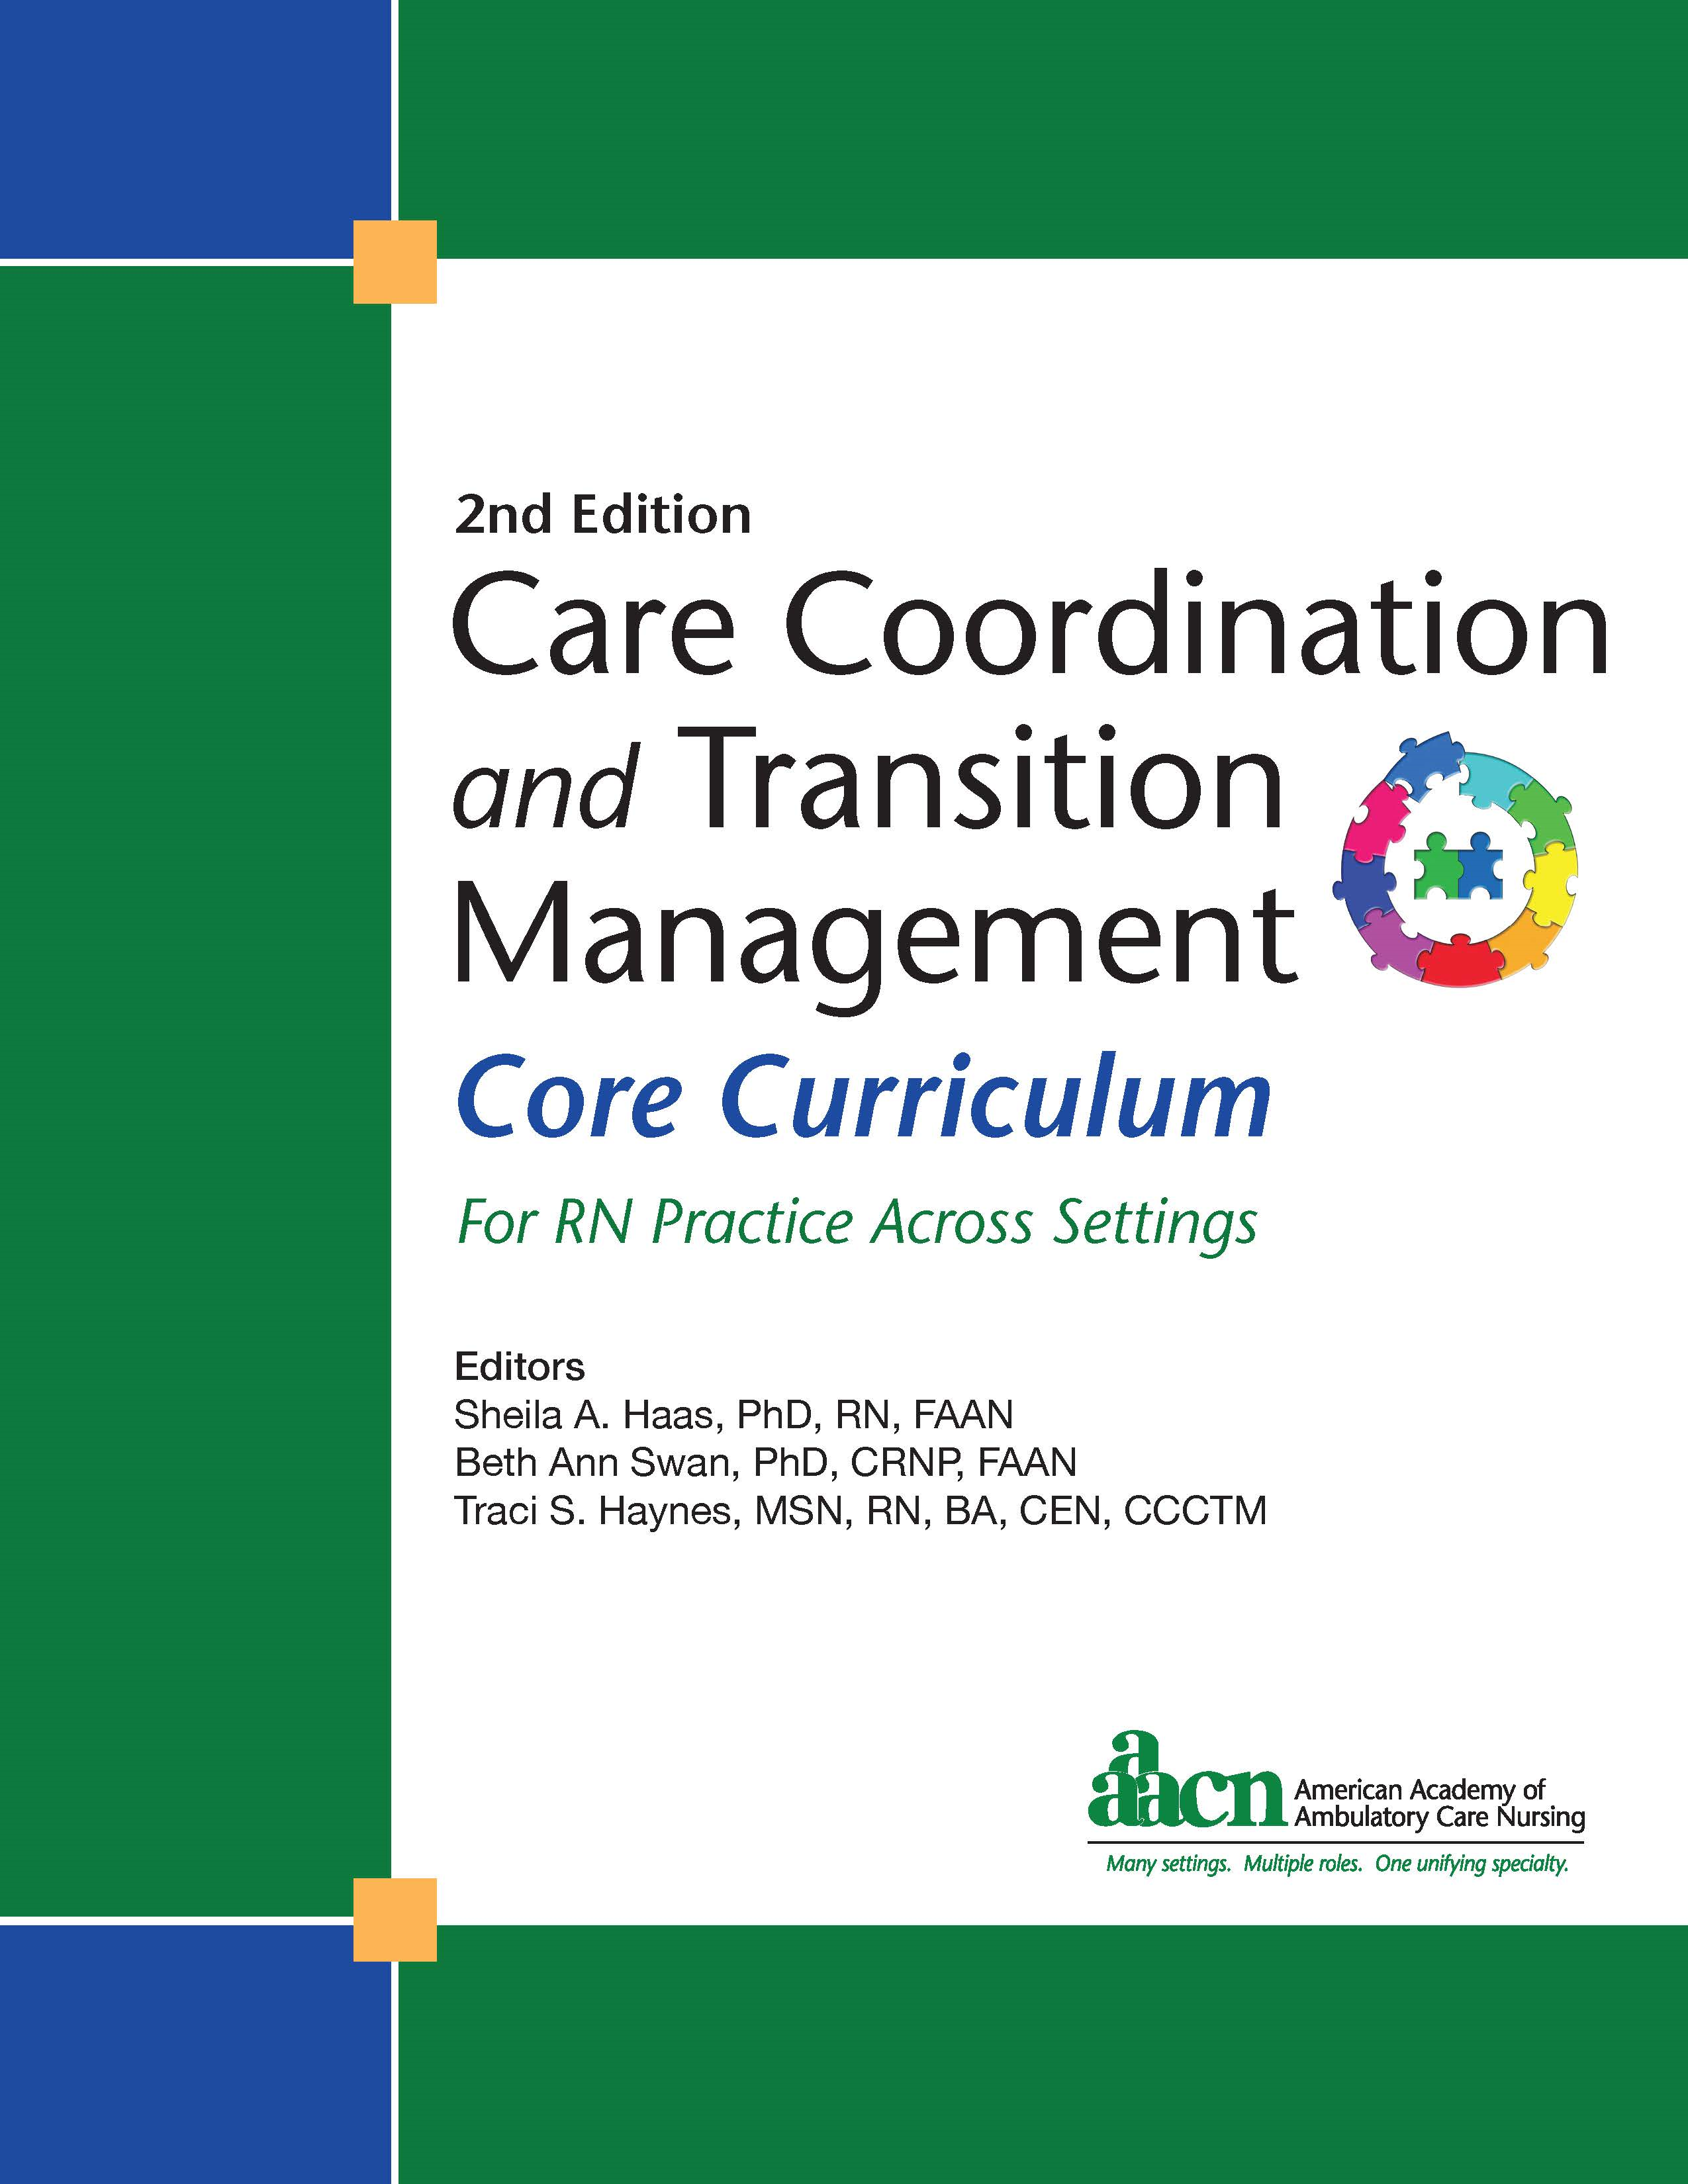 Care Coordination and Transition Management (CCTM) Core Curriculum, 2nd Edition, 2019